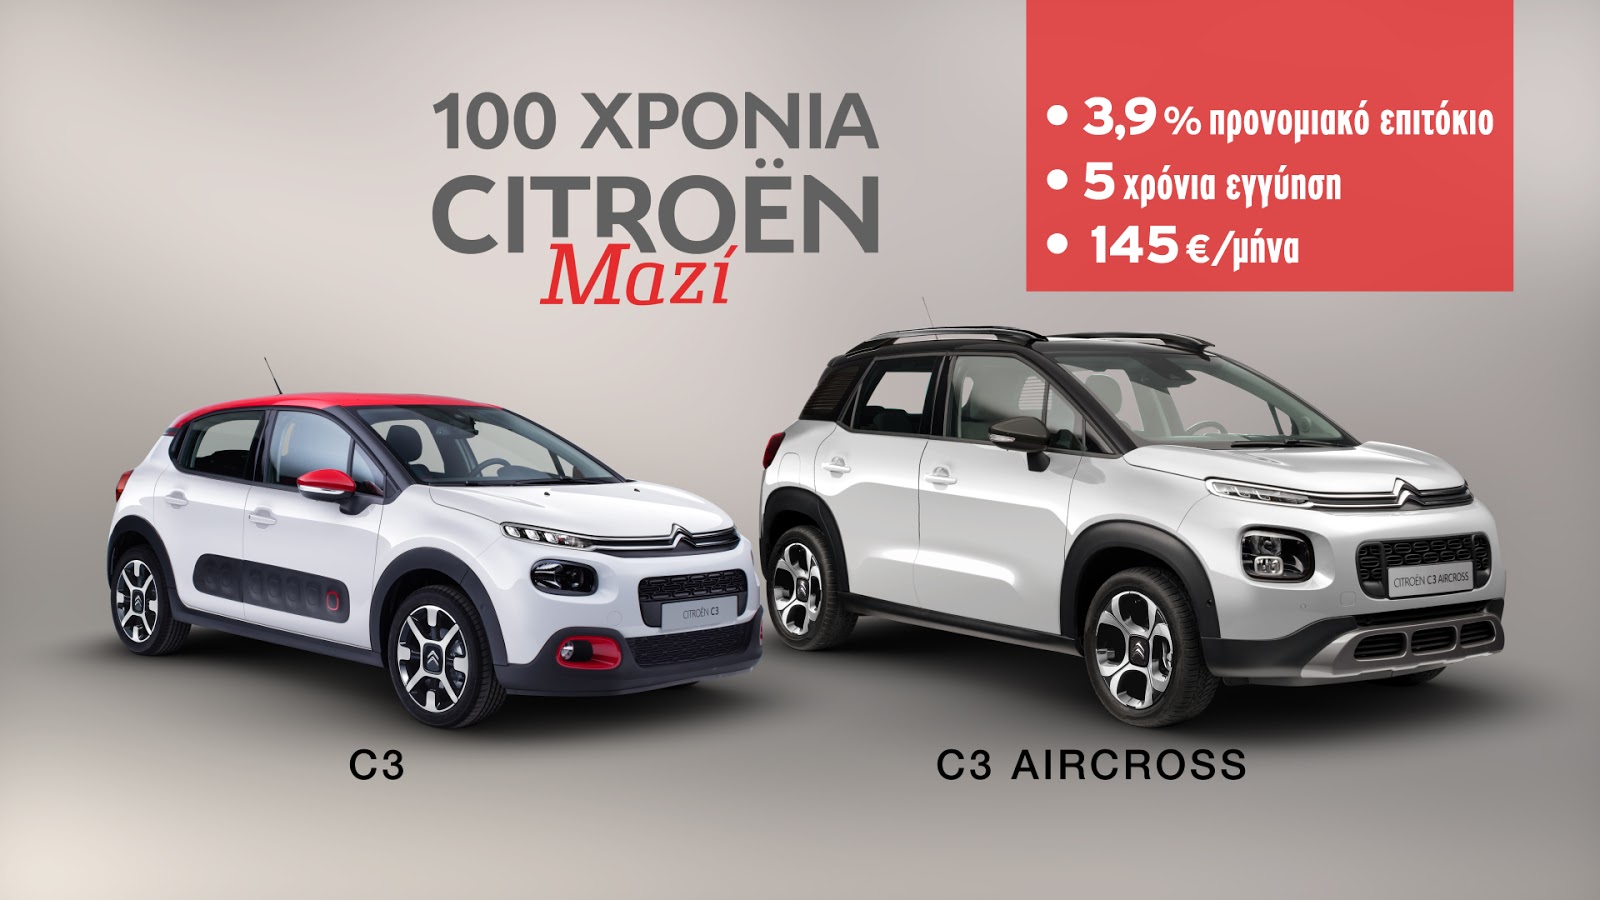 CITROEN 100 YEARS 001 Citroen celebrates its 100th anniversary with special offers